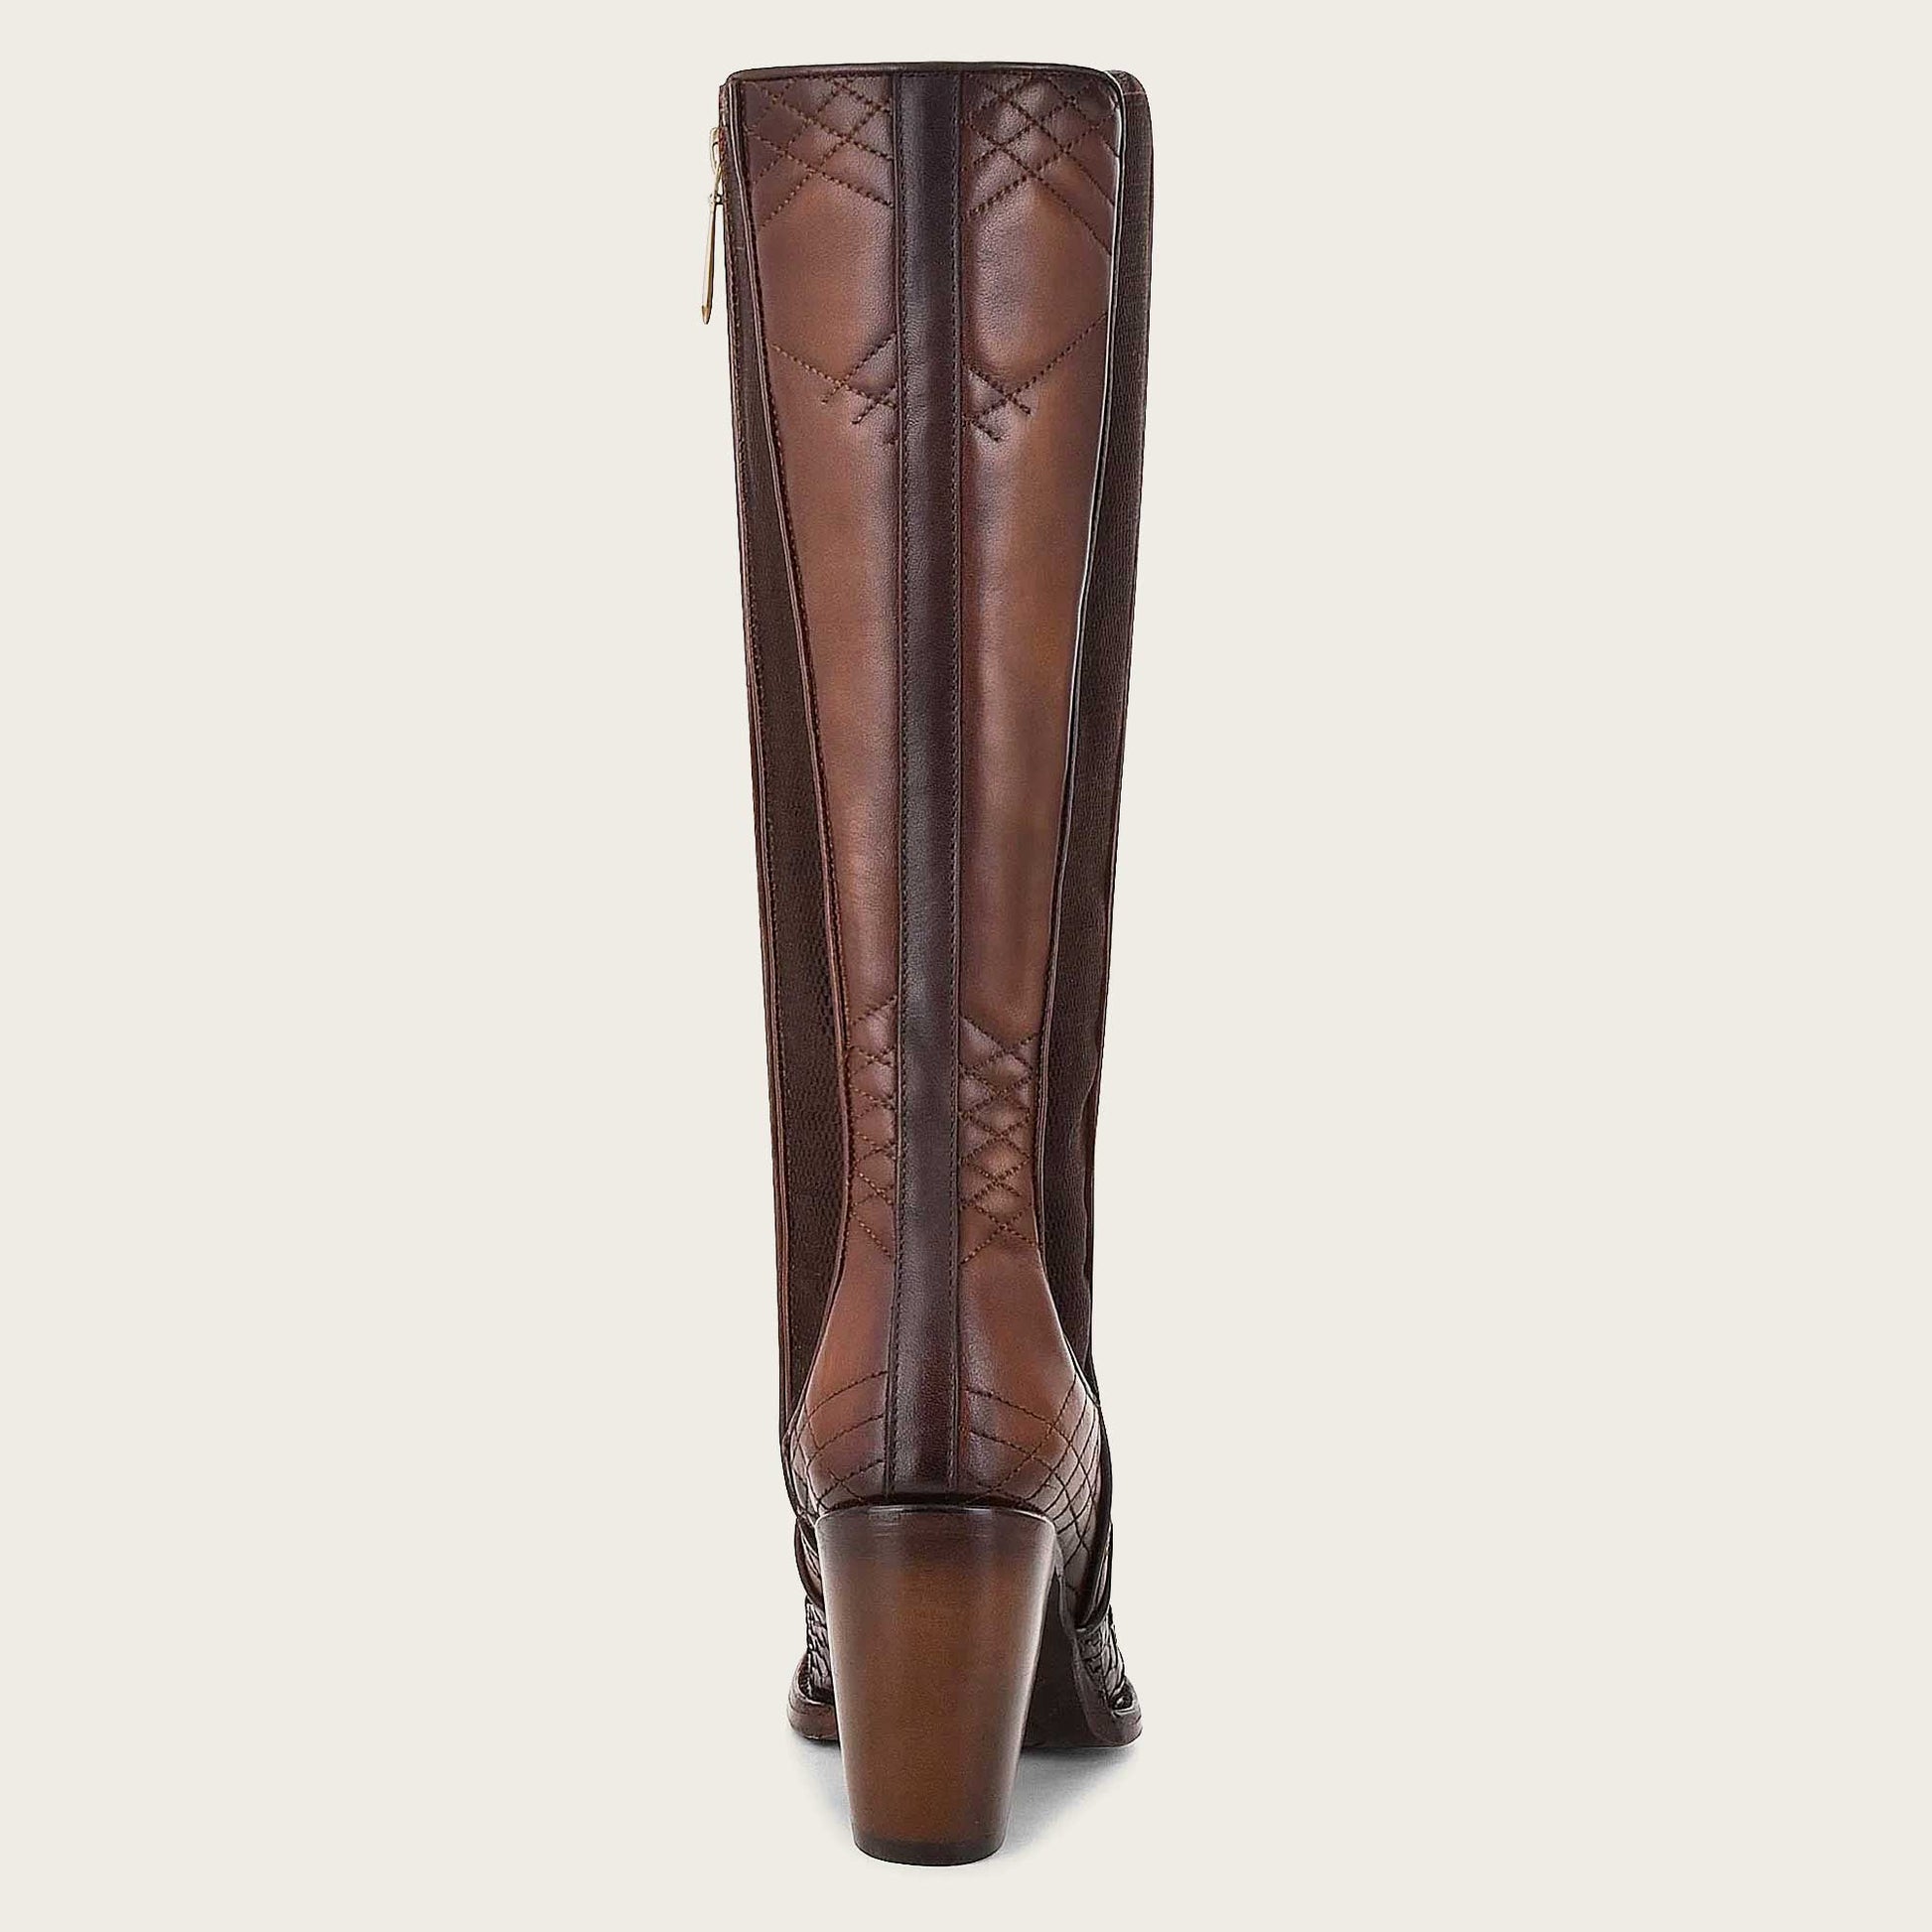 Brown python leather boot with laser engravings